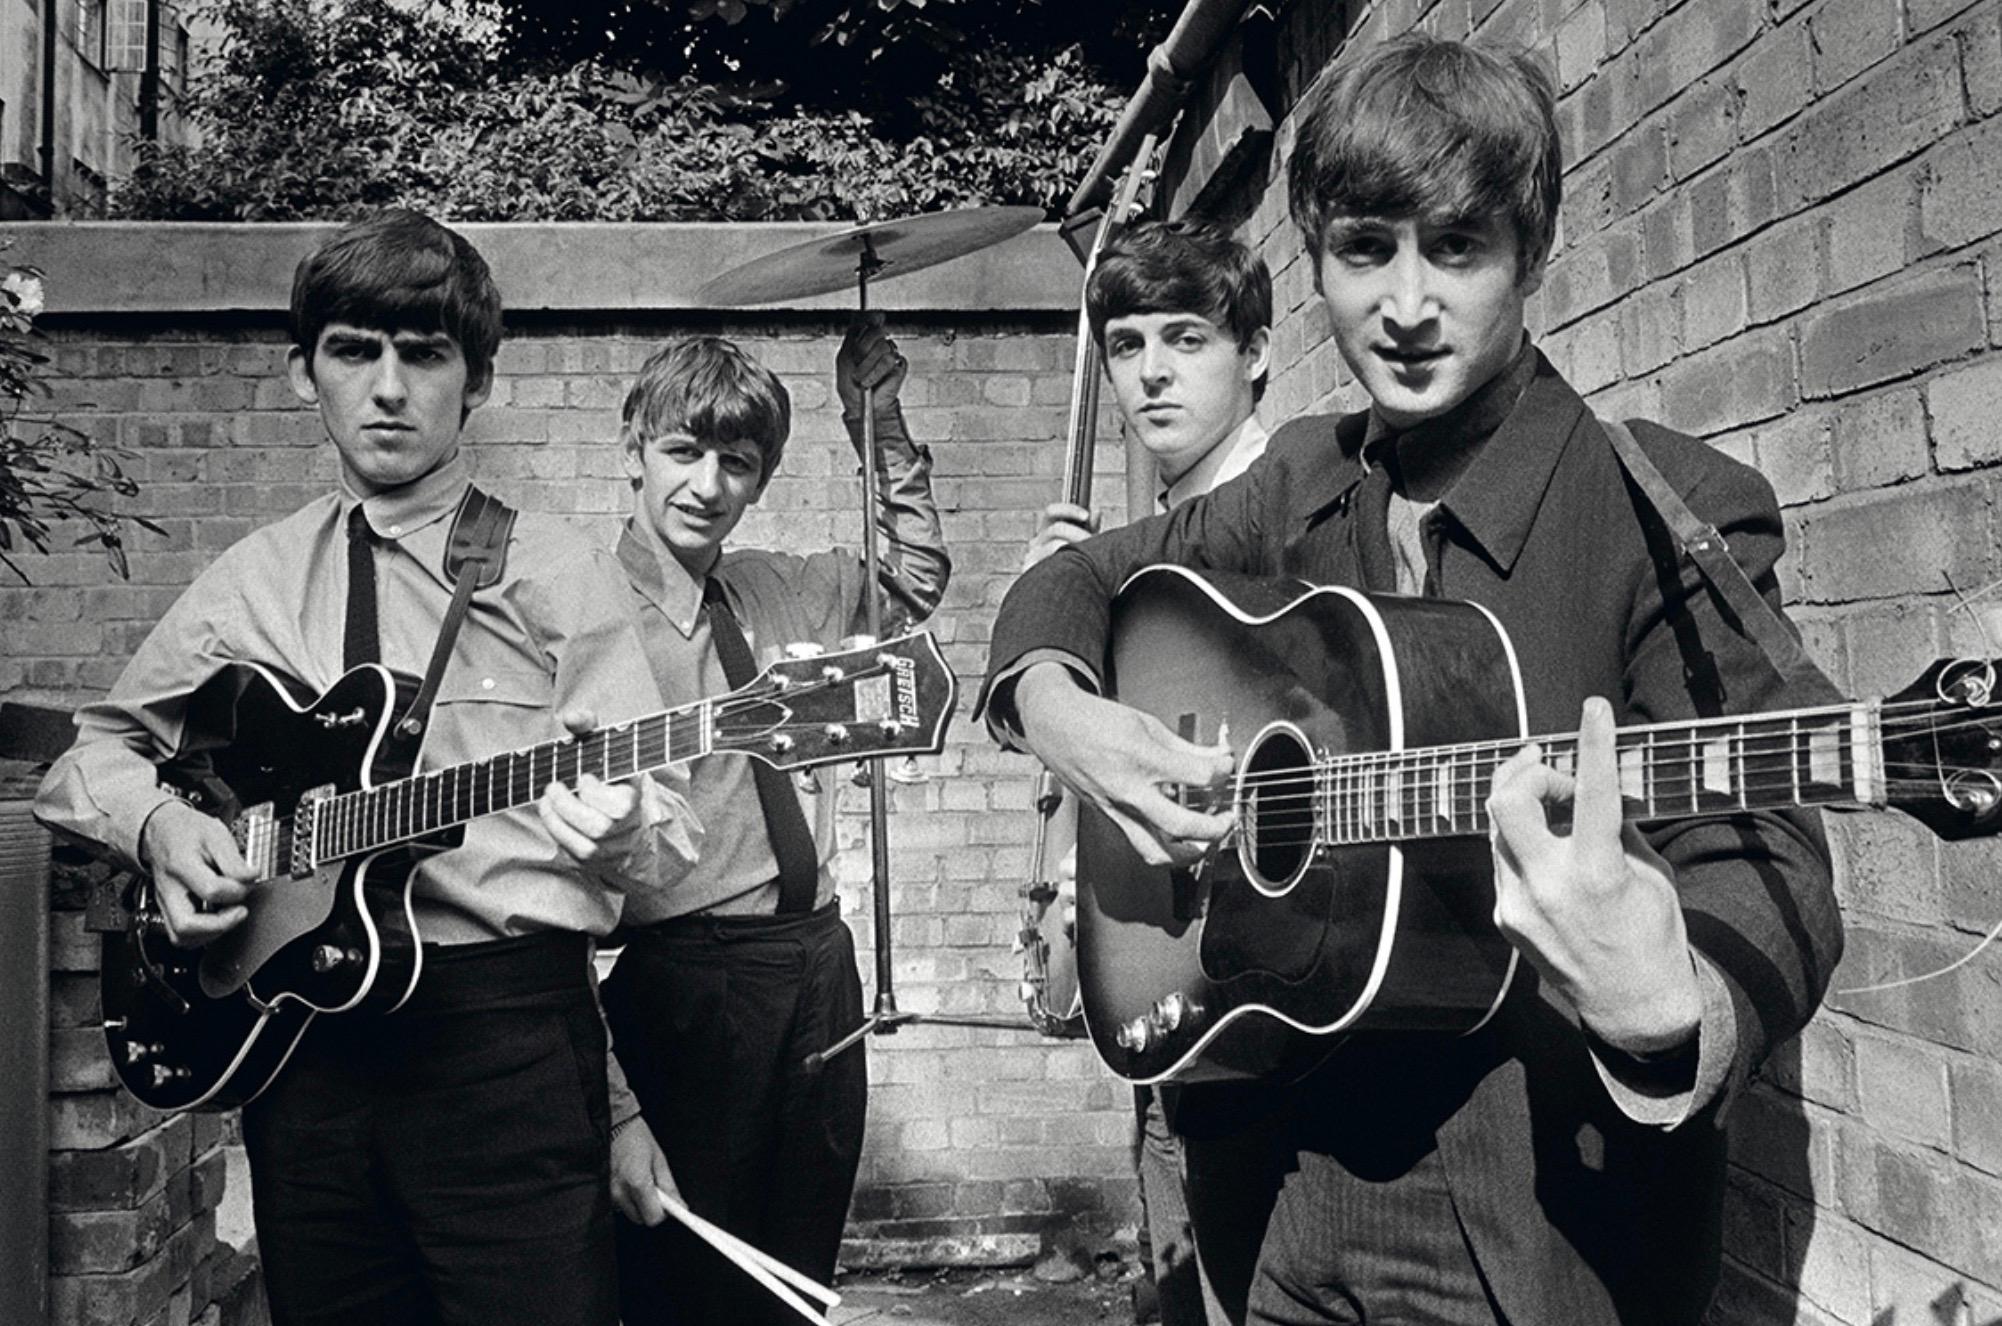 The Beatles at the Backyard of Abbey Road Studios  - Photograph by Terry O'Neill